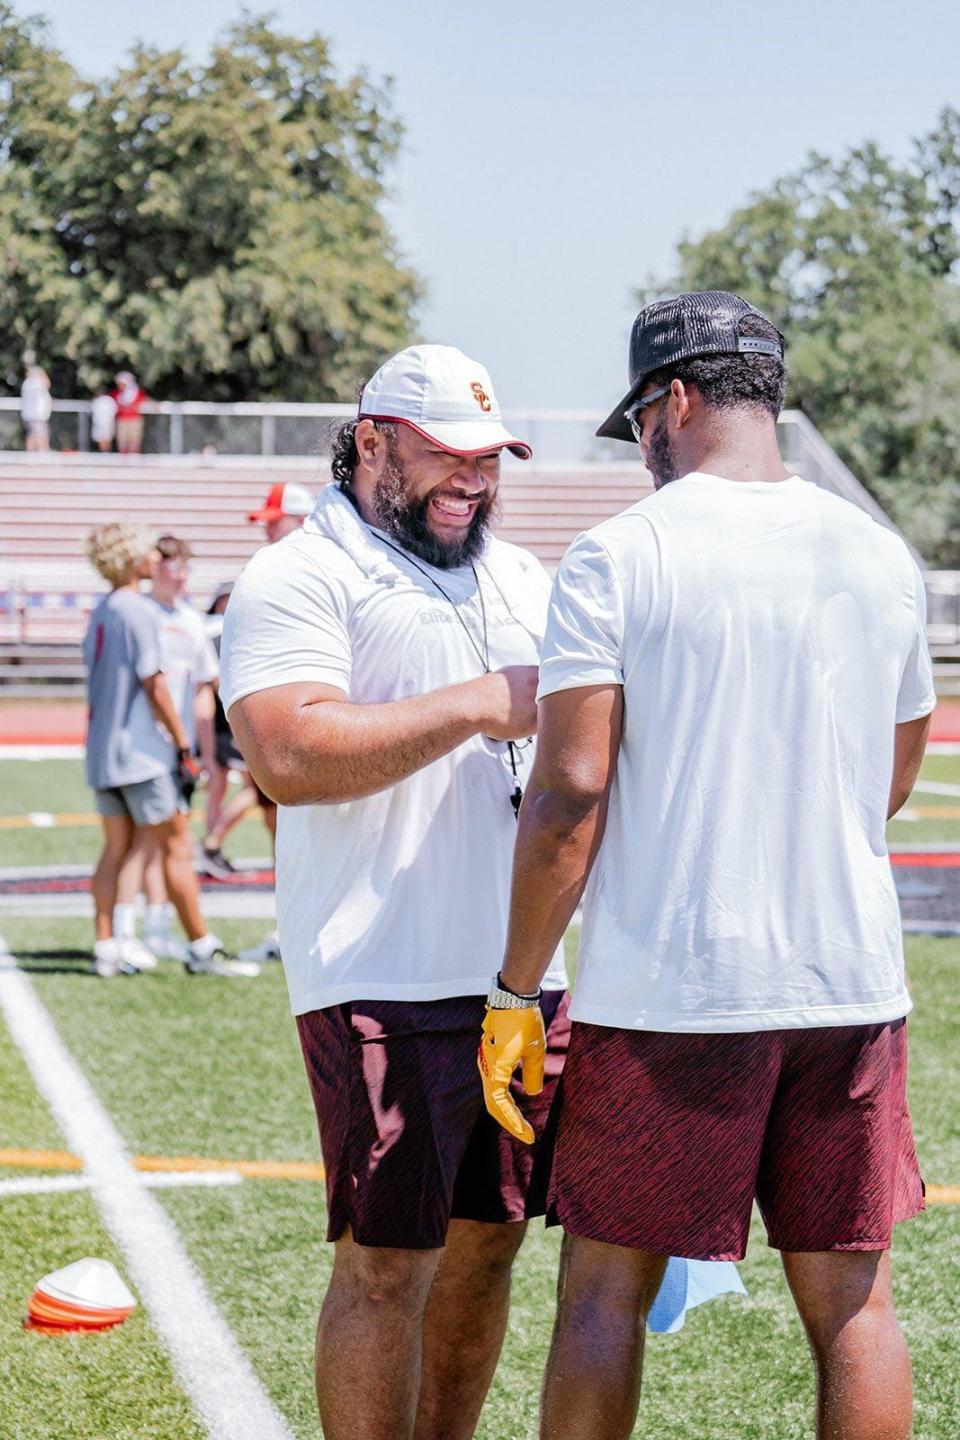 P.R.O Athletics founder and Redding resident Soma Vainuku shares a laugh with New England Patriots wide receiver Juju Smith-Schuster during the Elite Skills Academy Camp at Foothill High School on Saturday, July 1, 2023.